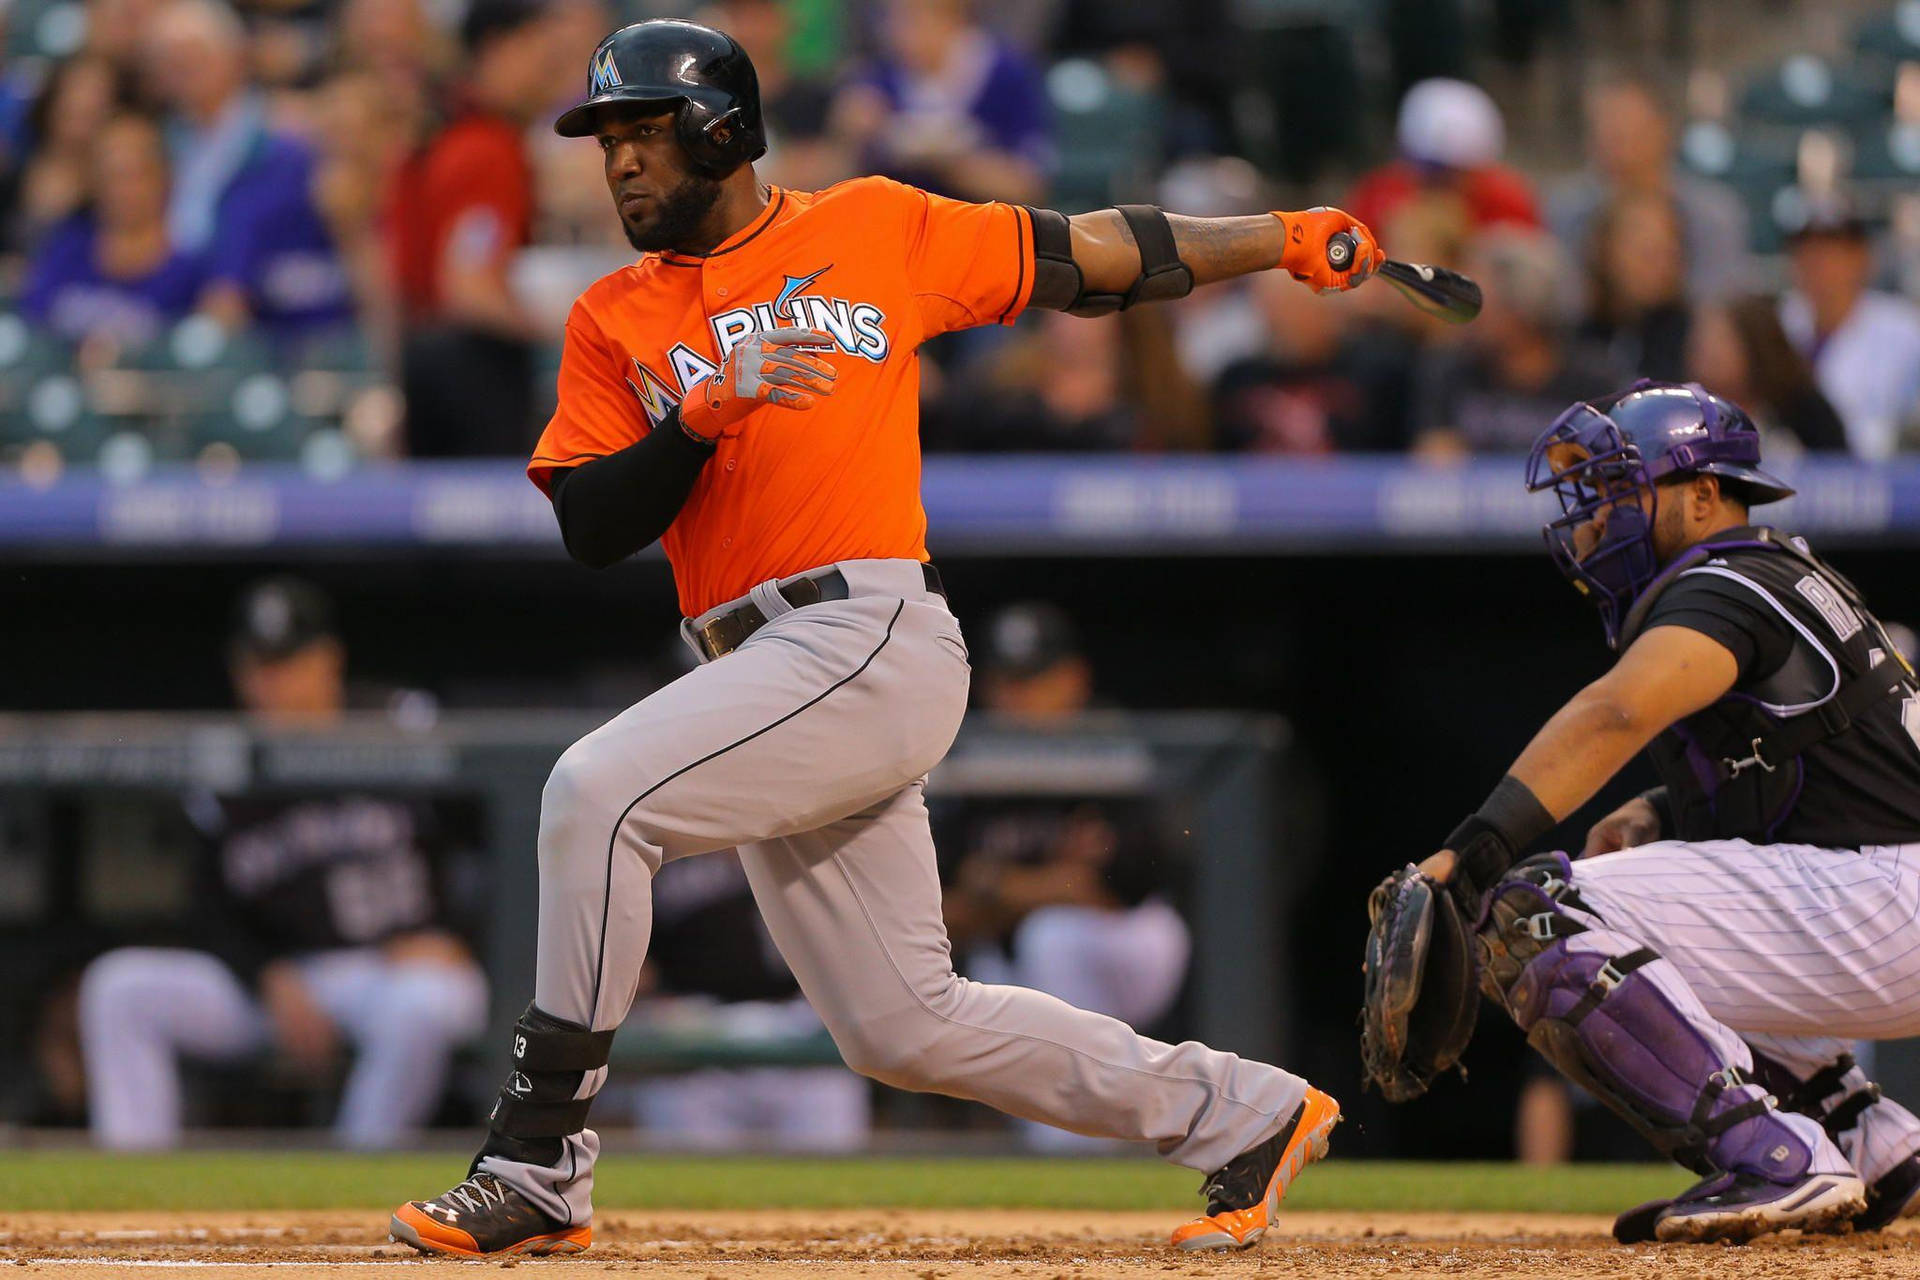 Download Marcell Ozuna With Orange Jersey Wallpaper